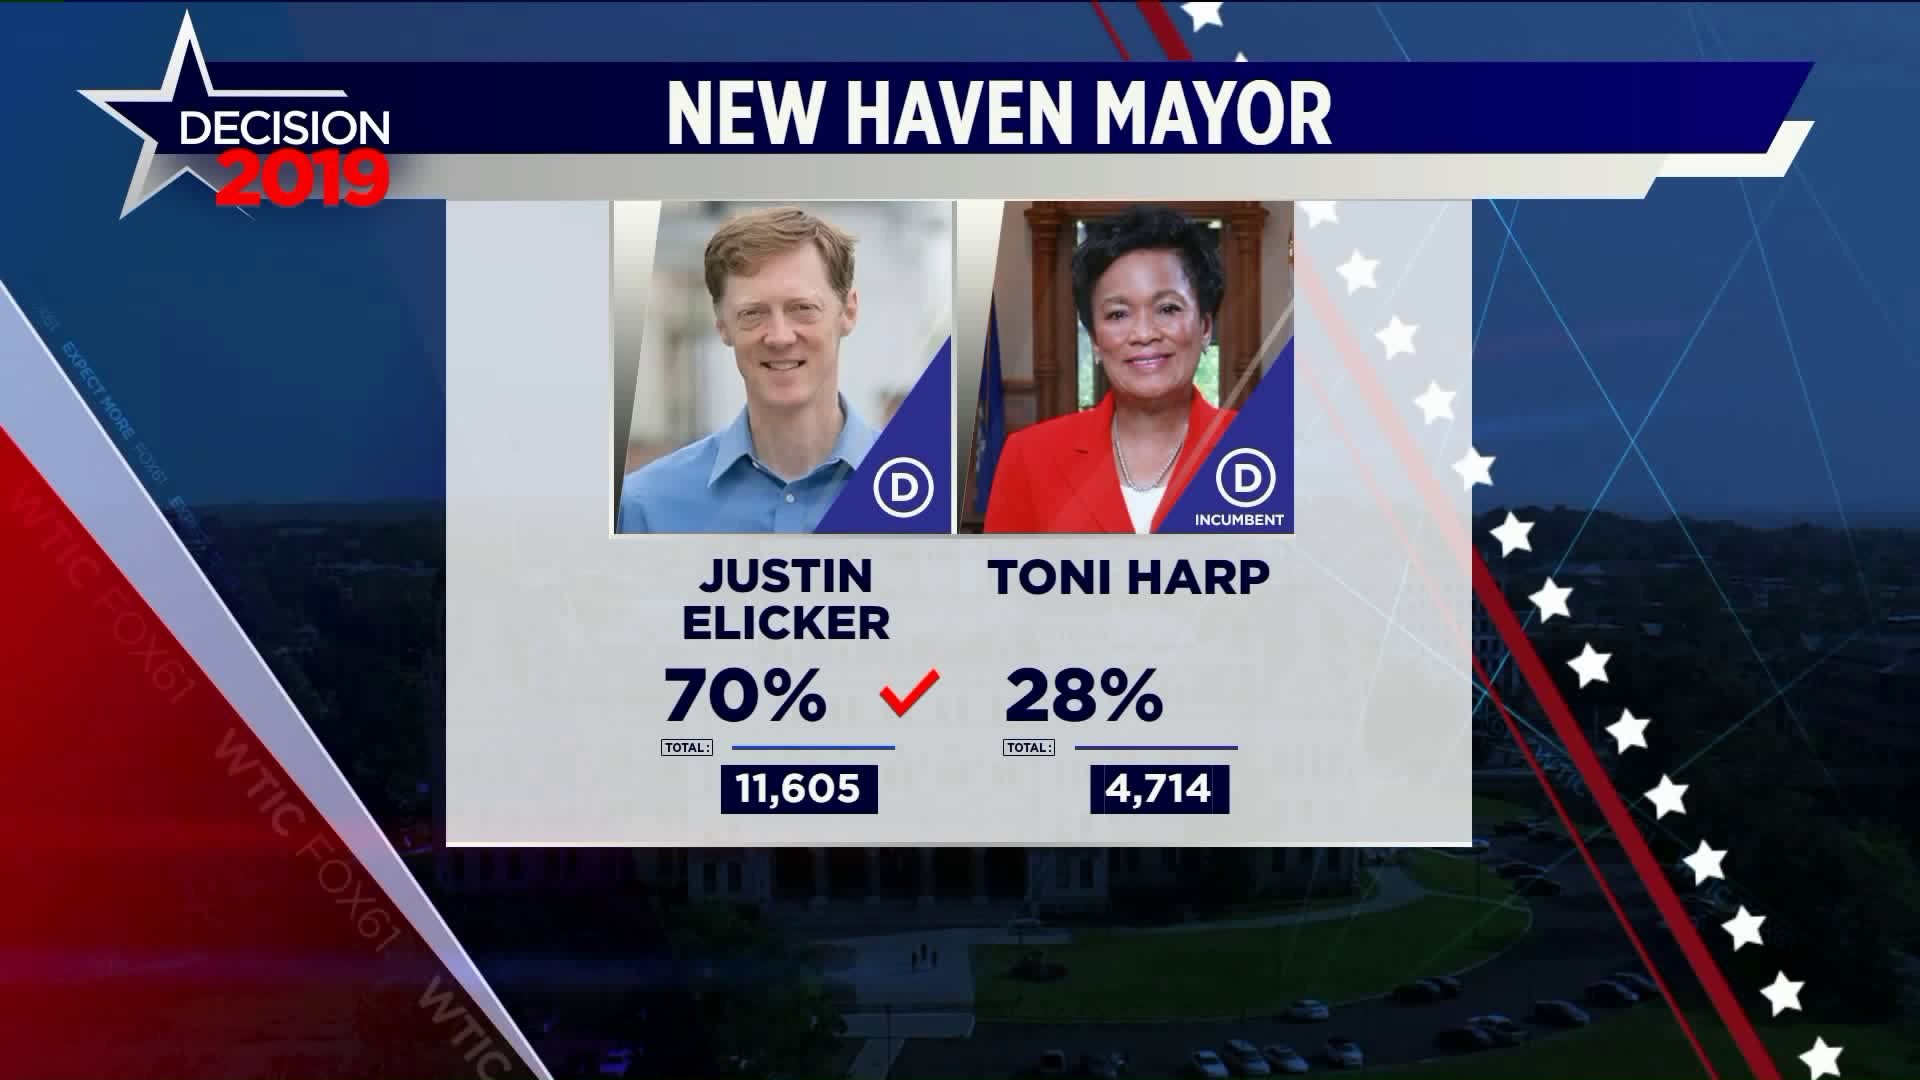 Justine Elicker wins New Haven Mayoral race